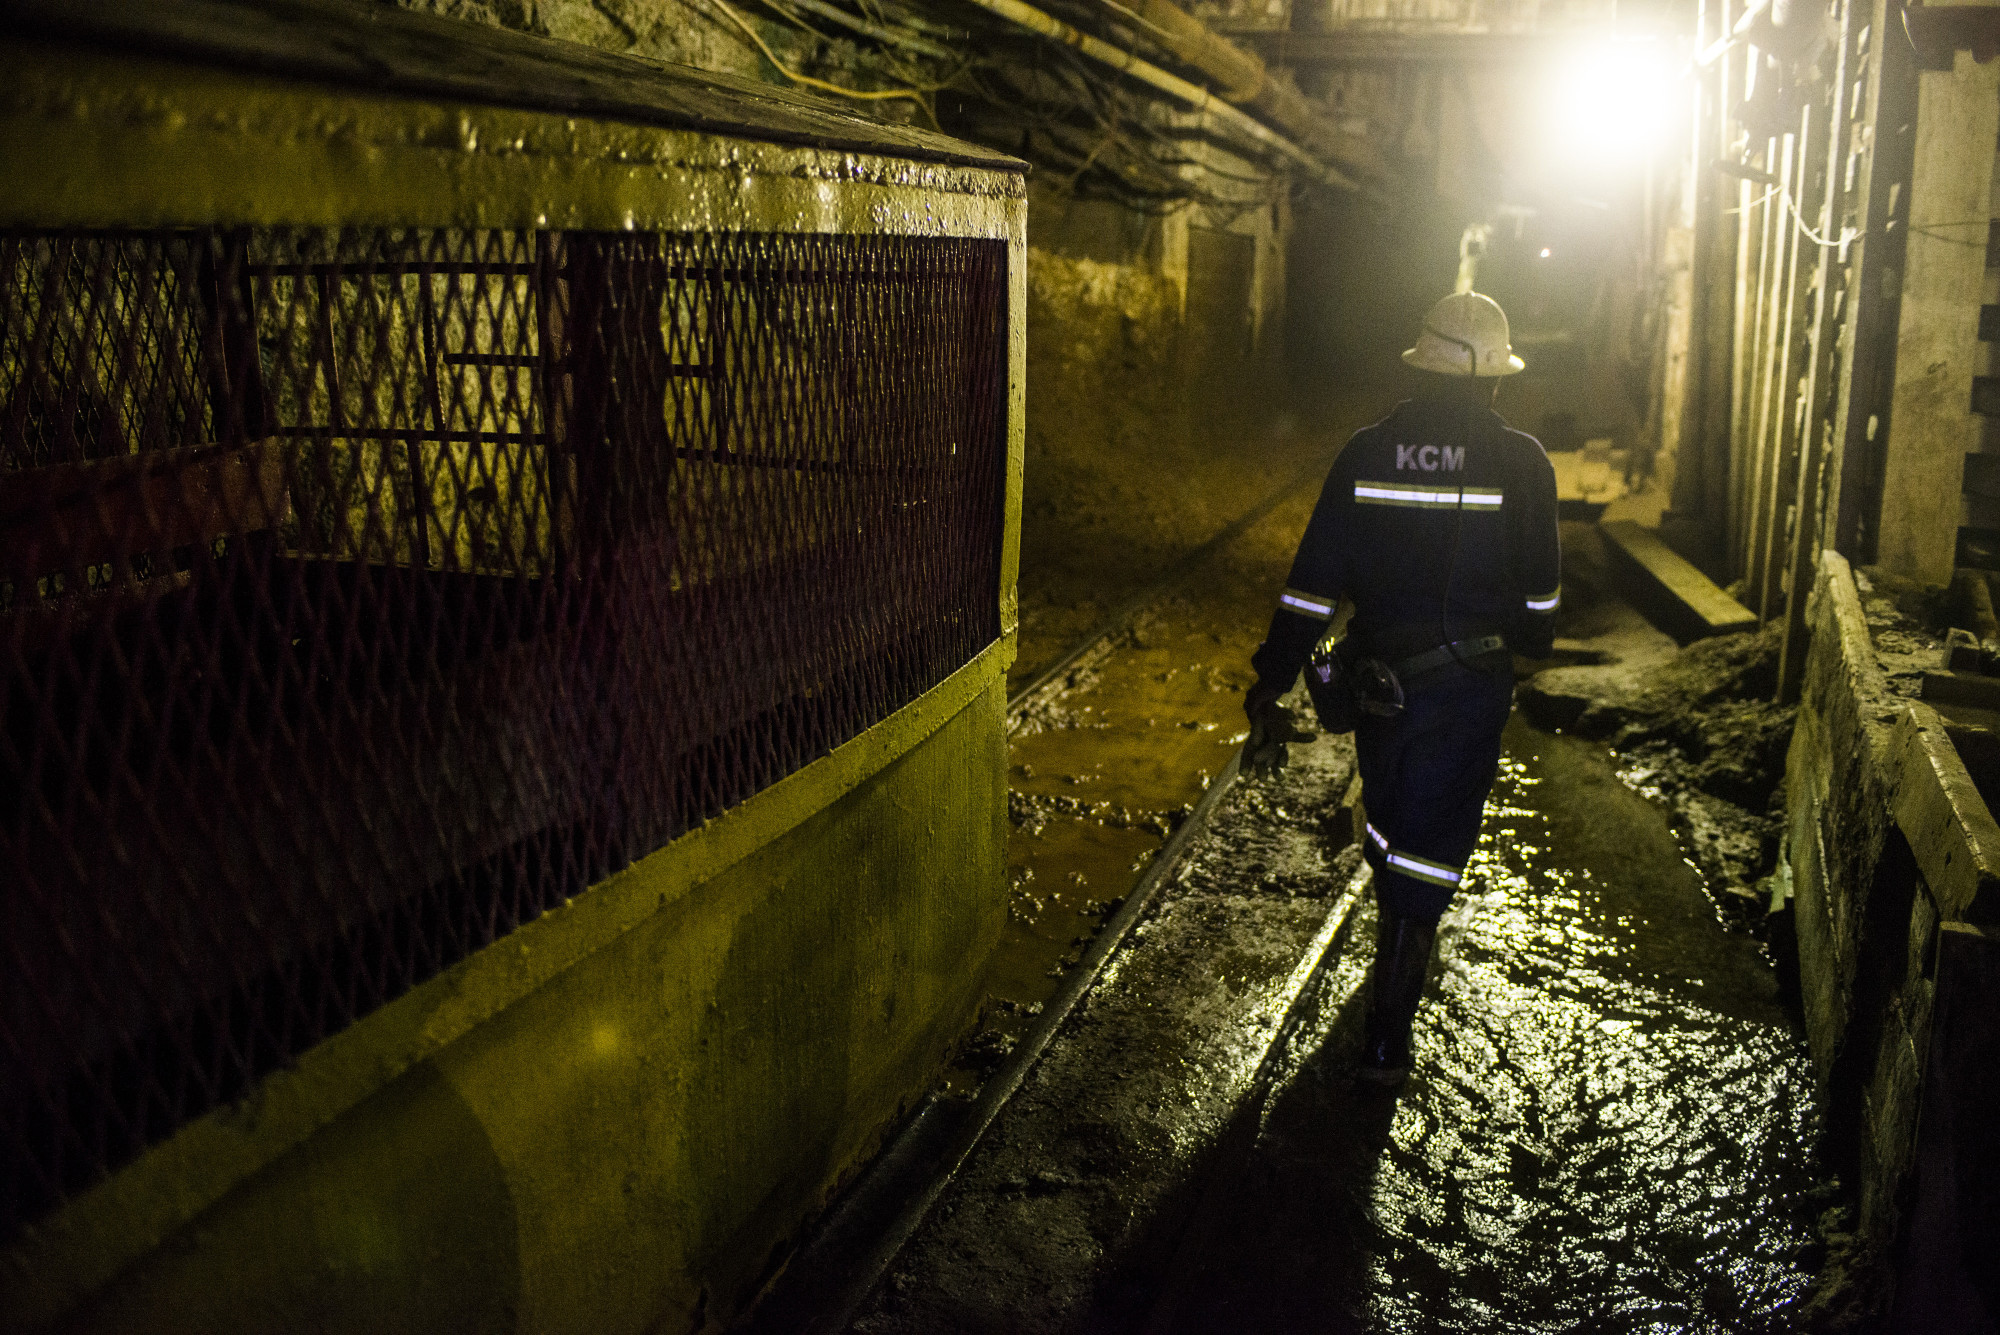 A miner walks along rail tracks in an underground tunnel at the Nchanga copper mine, operated by Konkola Copper Mines Plc, in Chingola, Zambia.